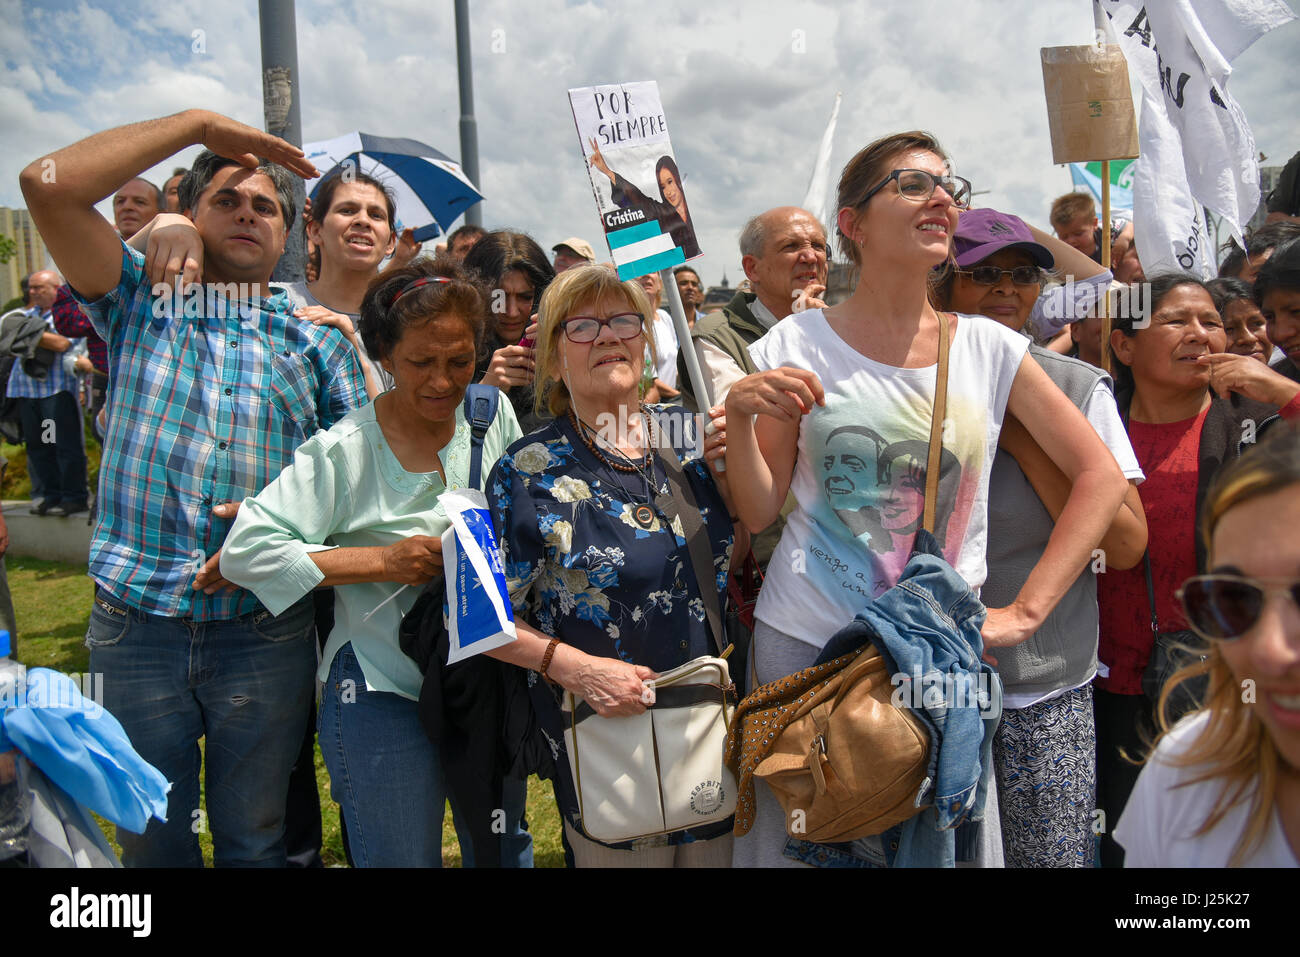 Buenos Aires, Argentina. 31 Oct, 2016. People gather near the Comodoro Py courthouse in Buenos Aires during ex-president of Argentina Cristina Fernandez de Kirchner's evidence in connection with investigation of corruption. Stock Photo